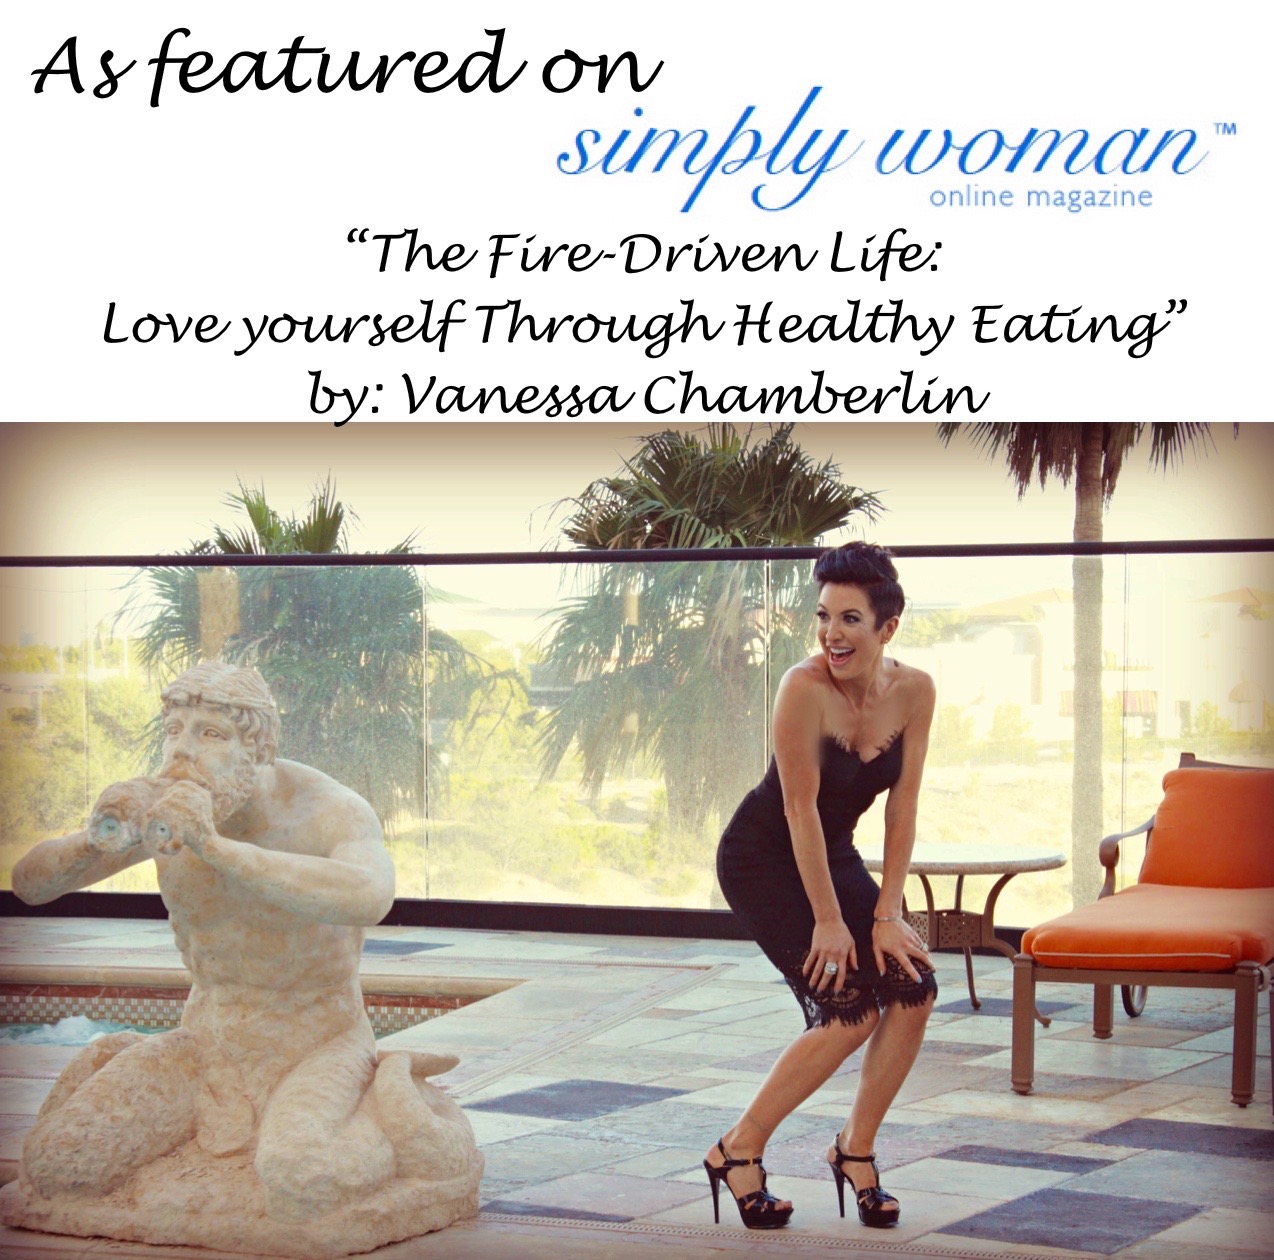 The Fire-Driven Life: Love Yourself Through Healthy Eating